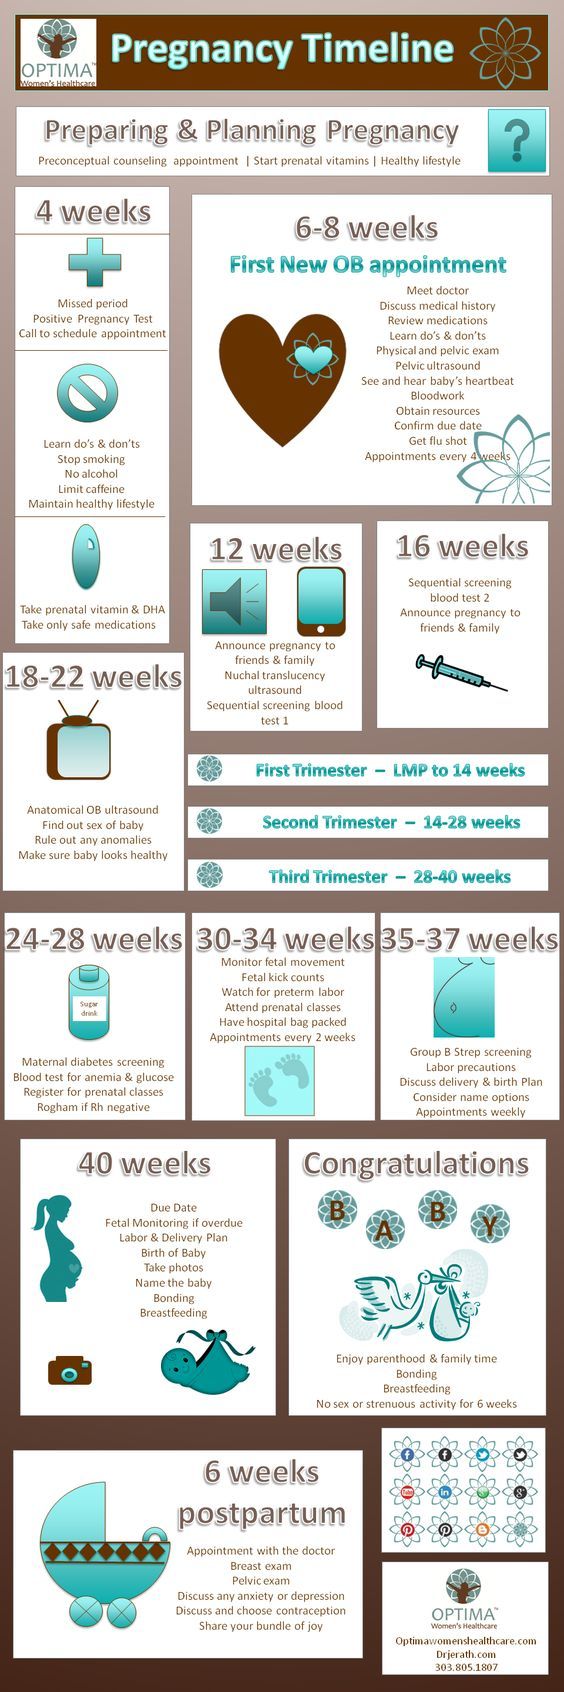 OptimaWHC Pregnancy Timeline for preparing and planning pregnancy ... -   Pregnancy Timeline for preparing and planning pregnancy.